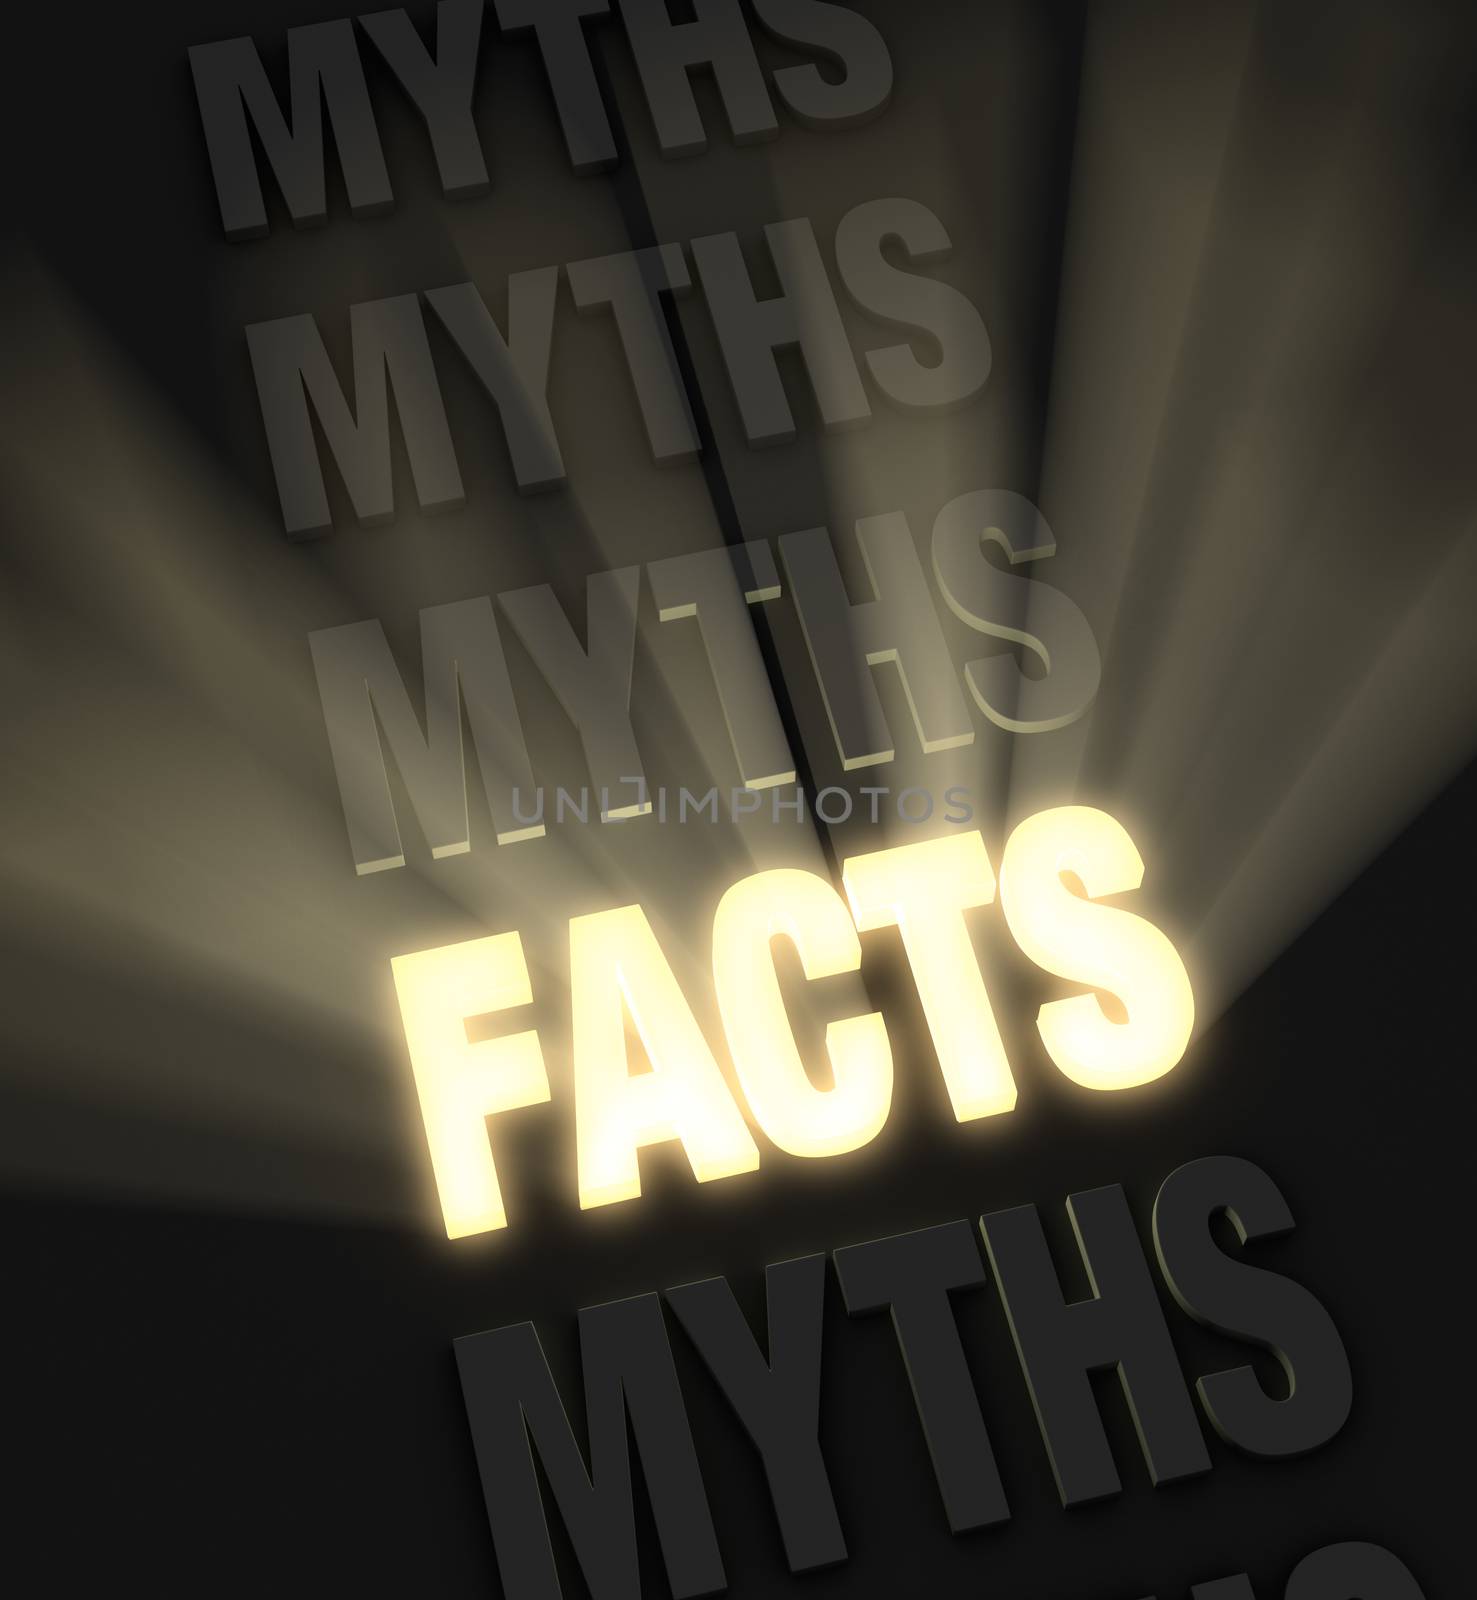 Brilliant Facts by Em3